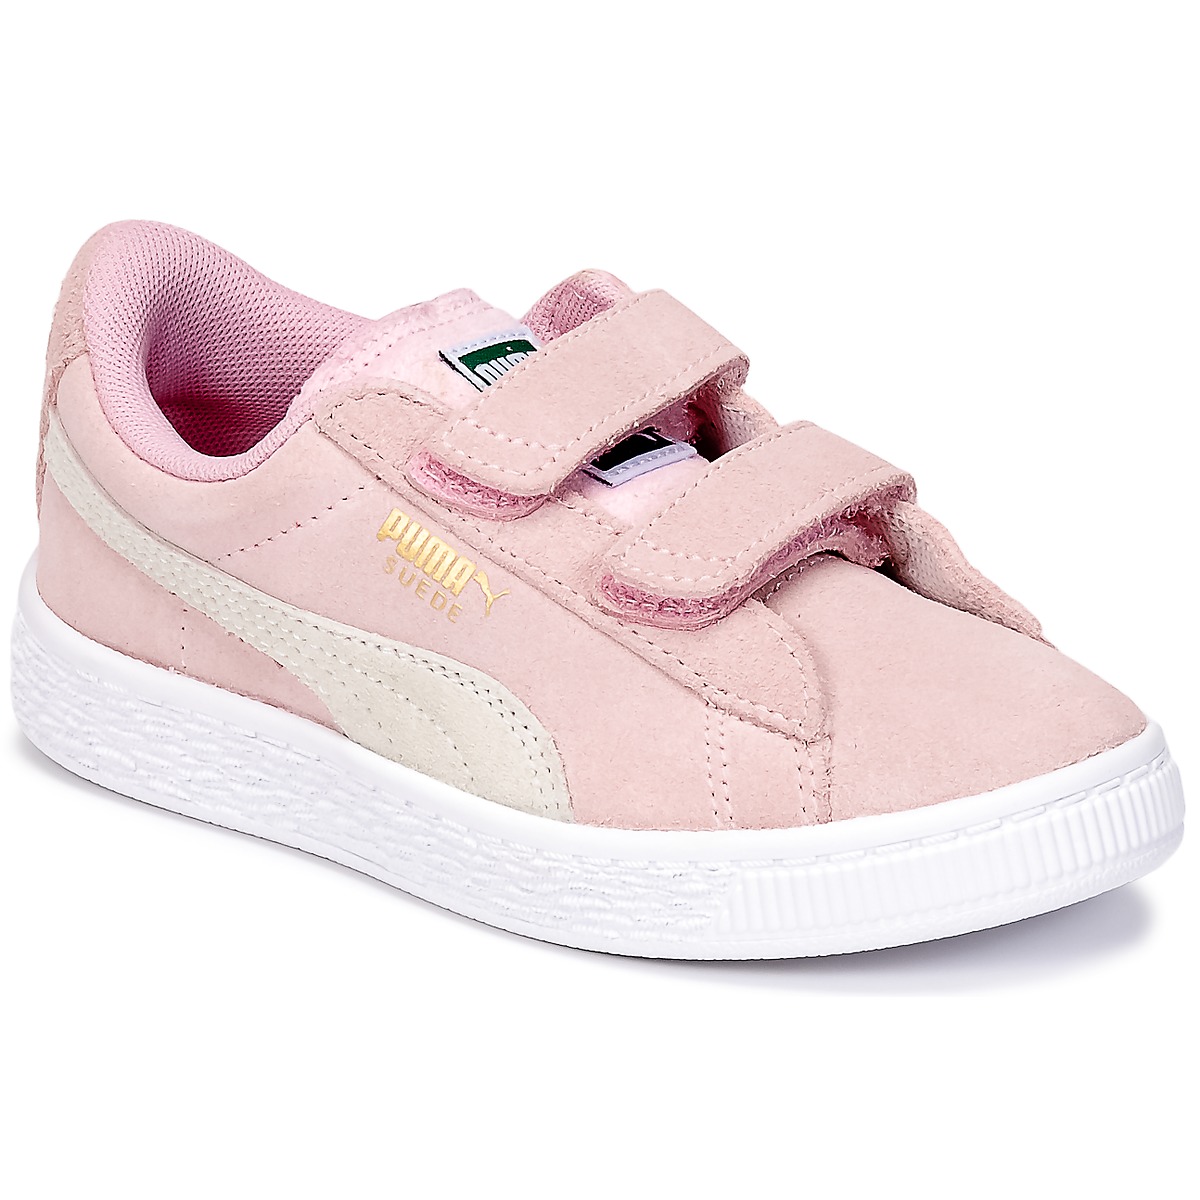 Chaussures Fille backpack puma core up backpack 077386 01 puma black SUEDE 2 STRAPS PS Rose